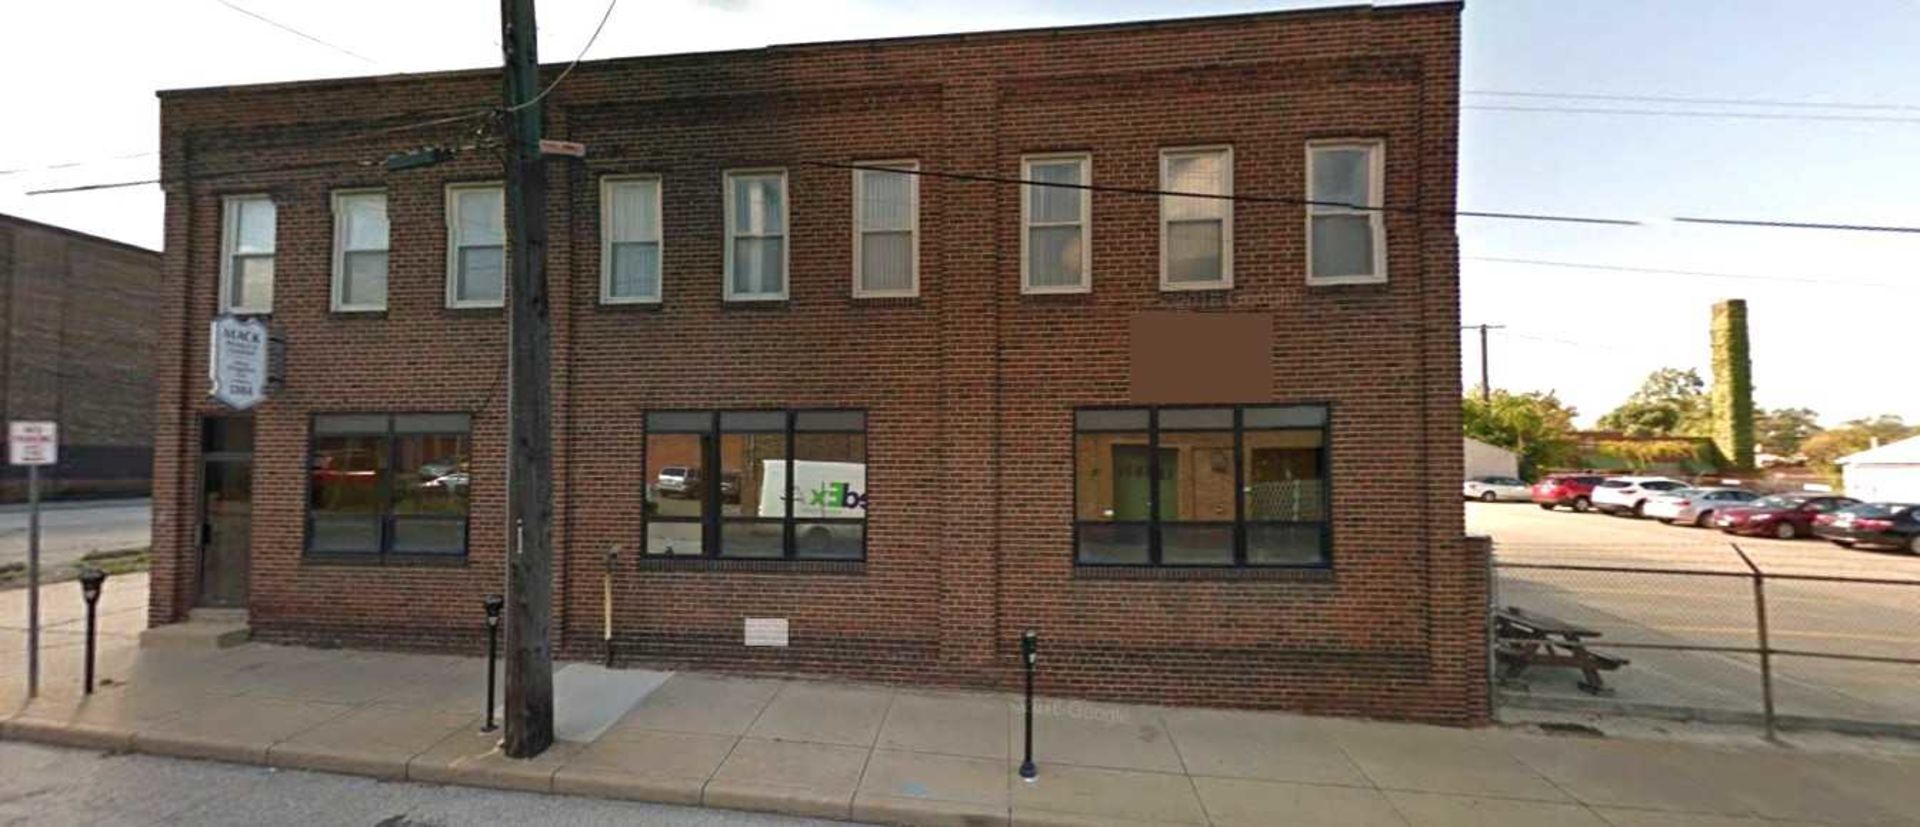 Unique Lakewood Office and Warehouse Building for Sale  for $79,000